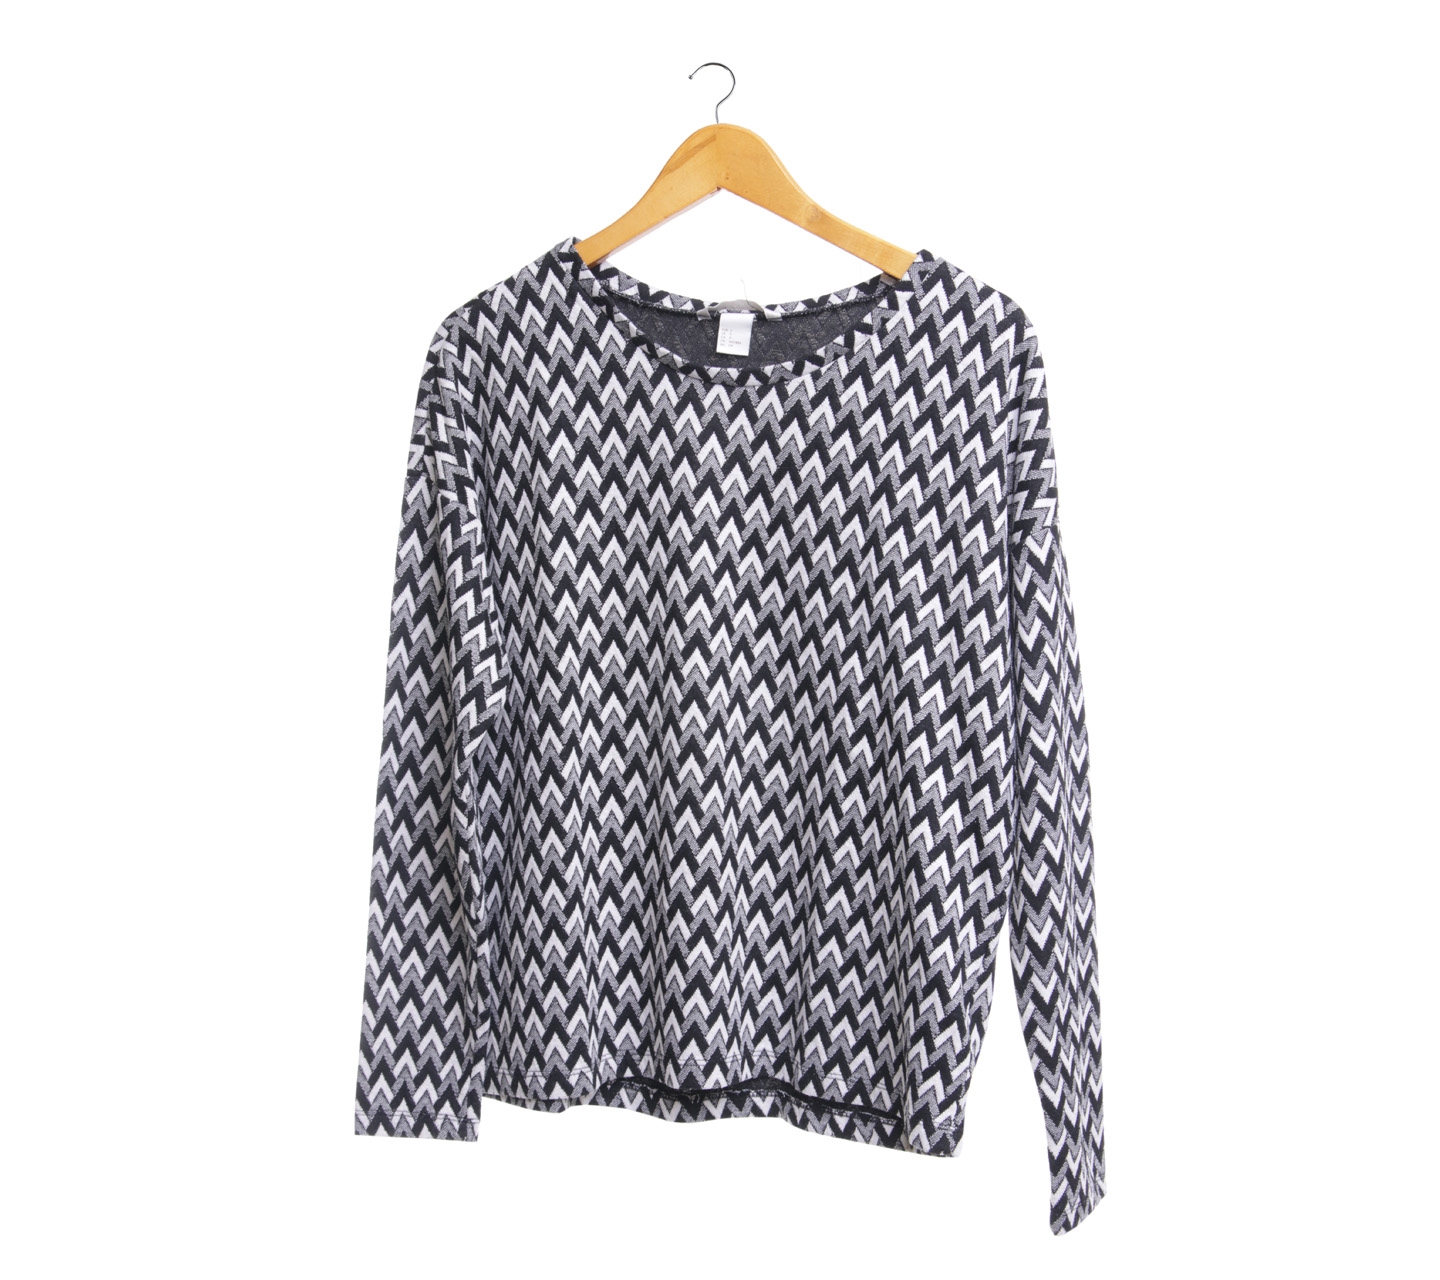 H&M Black And Grey Patterned Blouse